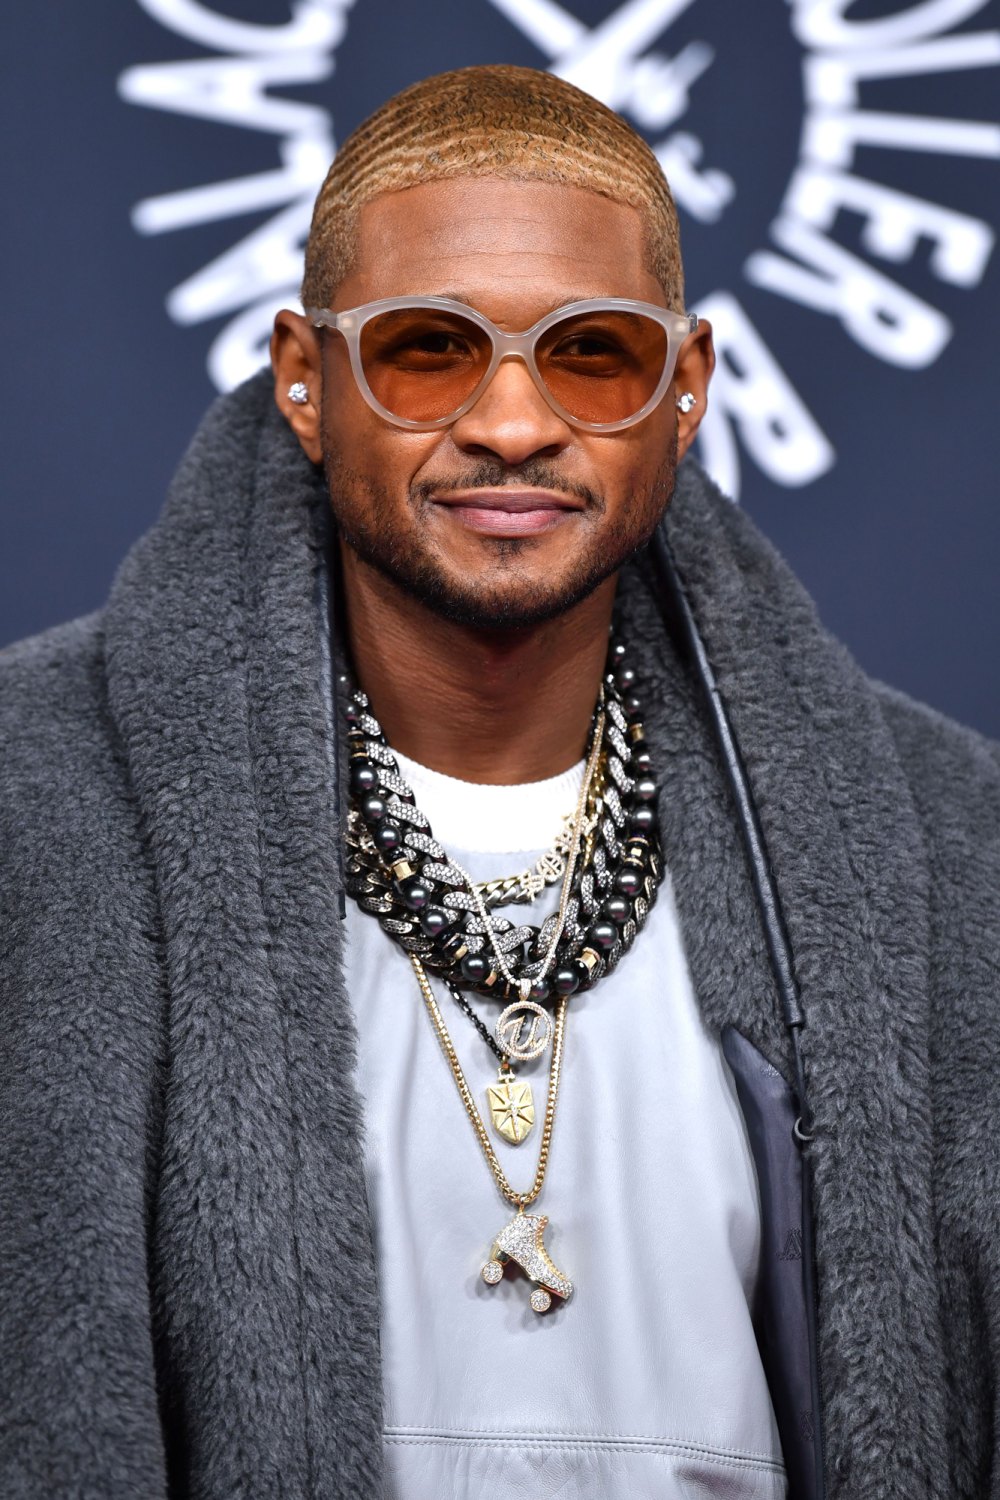 Usher Talks About Balancing Work and Family Life